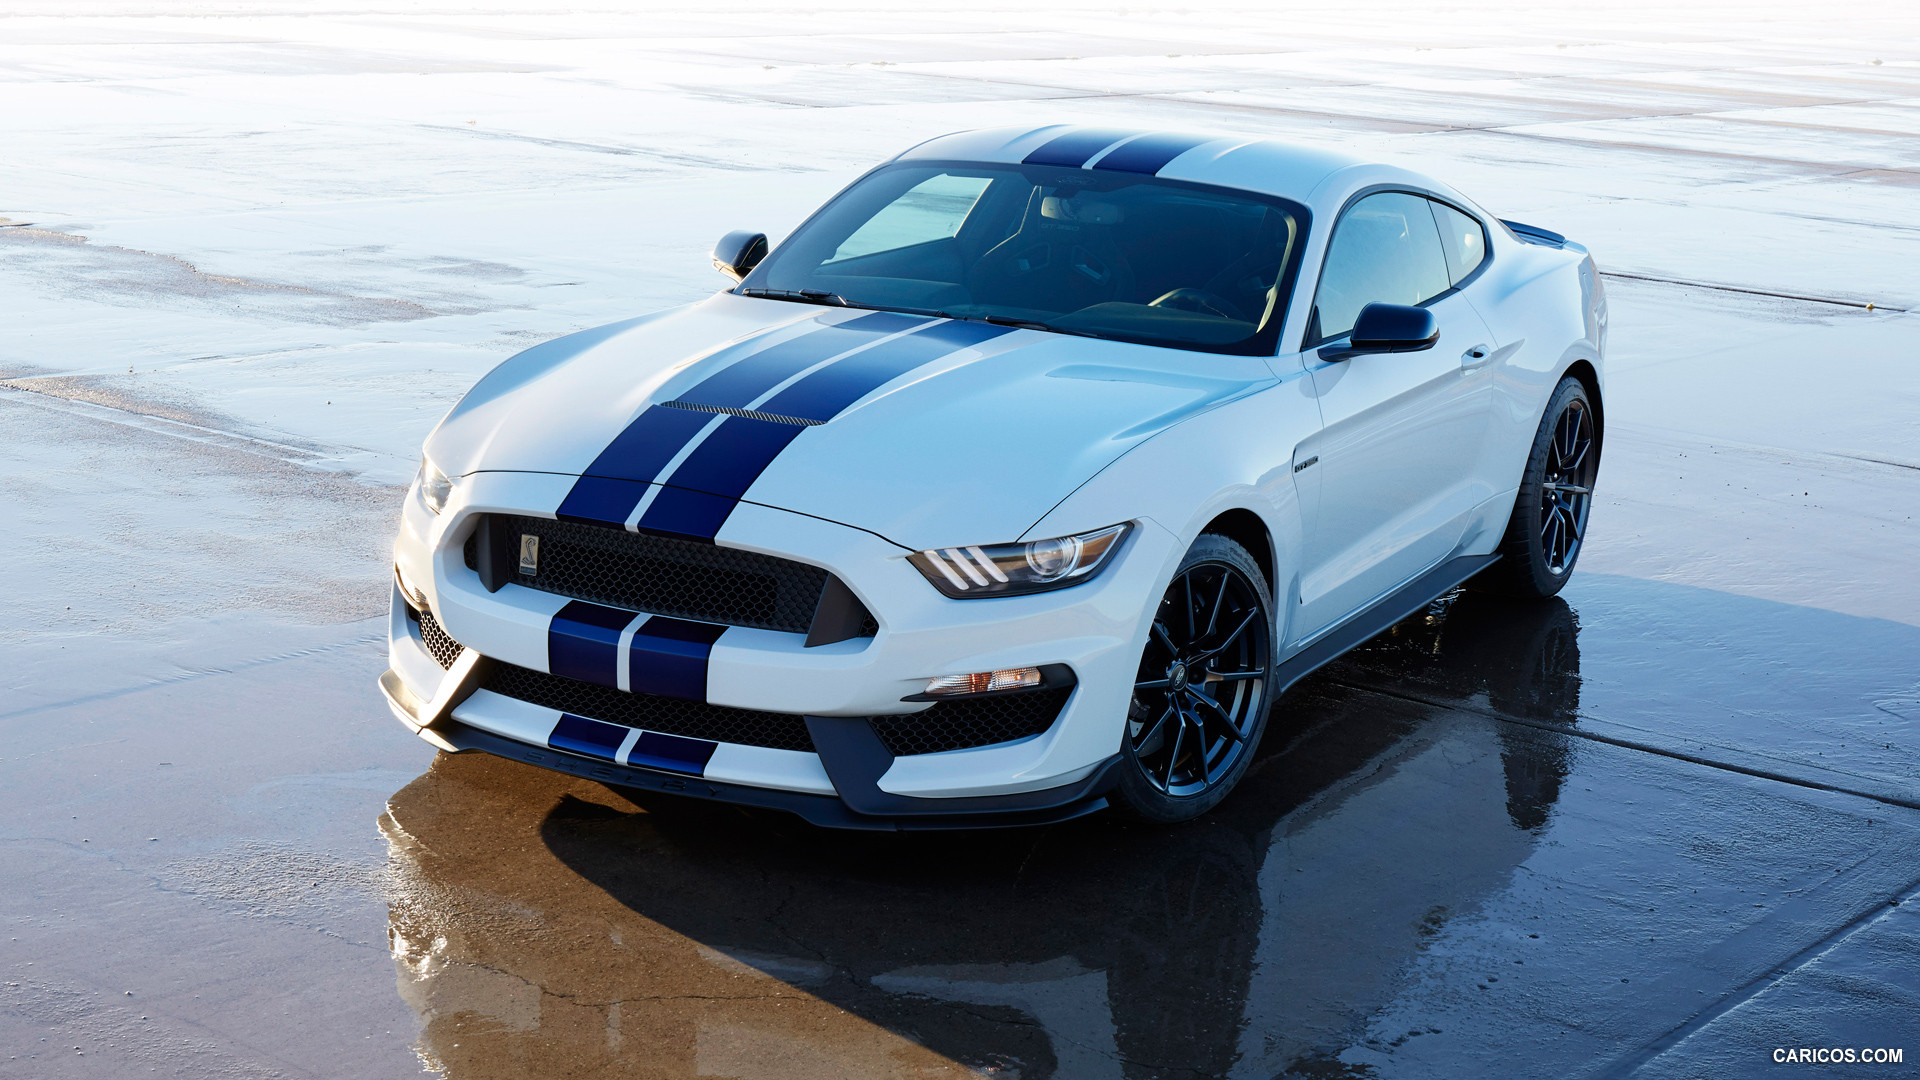 29+] Ford Mustang Shelby GT350 Wallpapers - WallpaperSafari